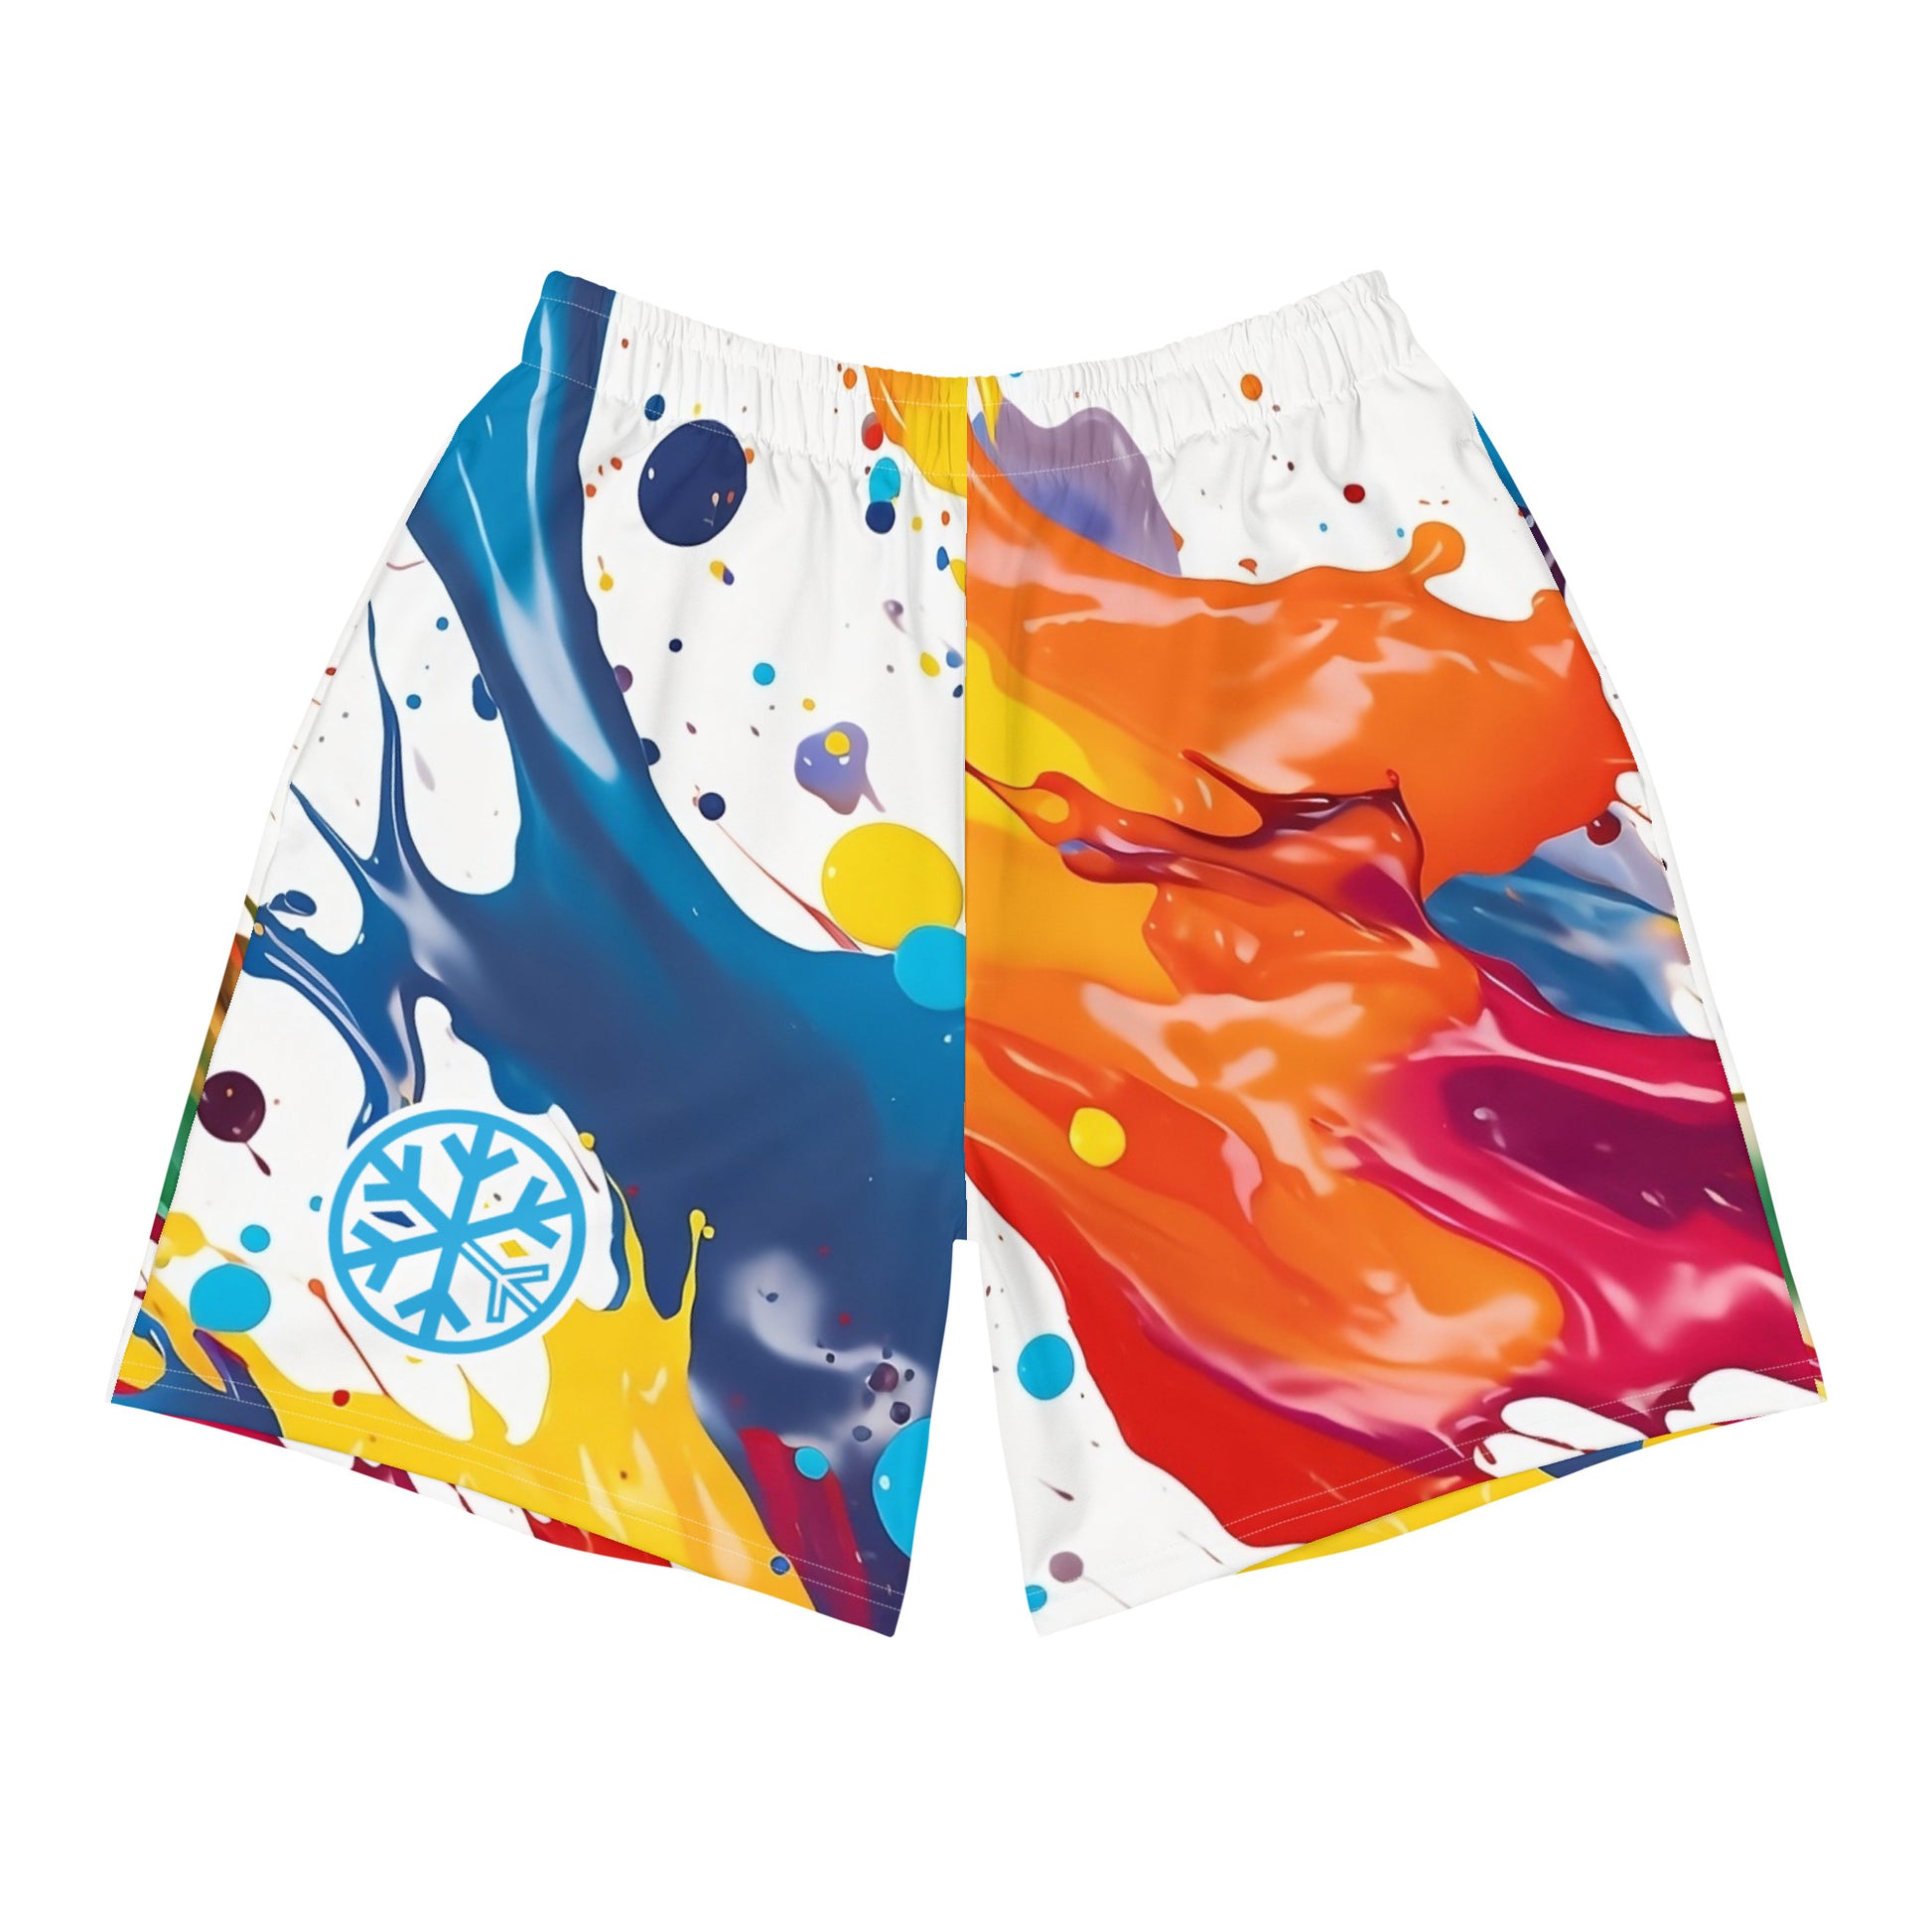 front of paint splatters shorts by B.Different Clothing independent streetwear inspired by street art graffiti